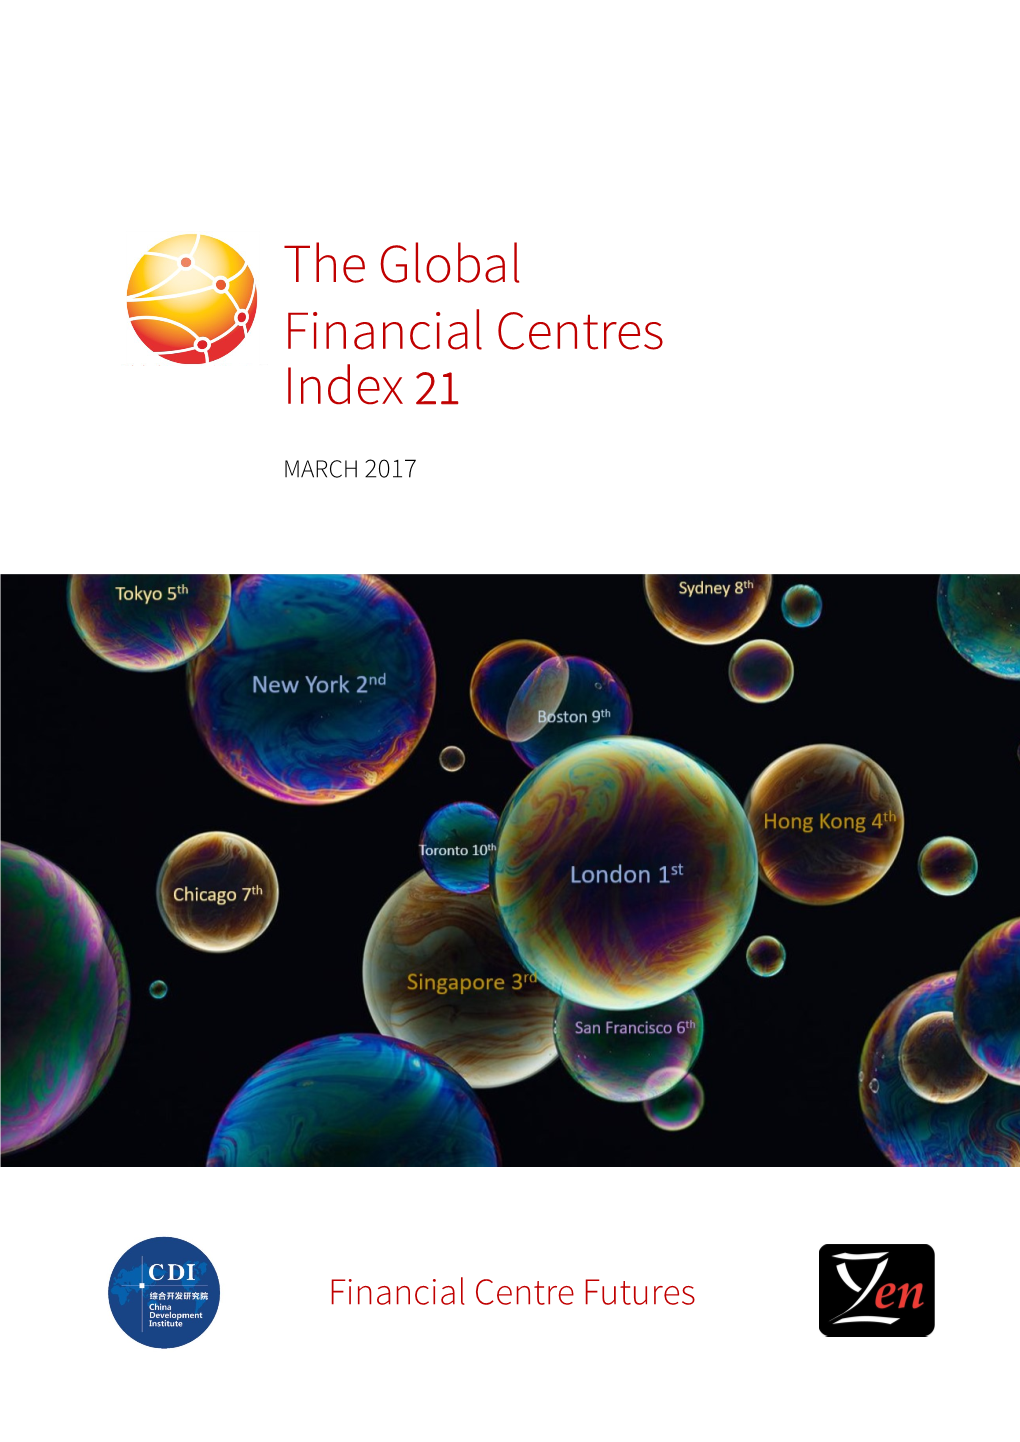 The Global Financial Centres Index 21